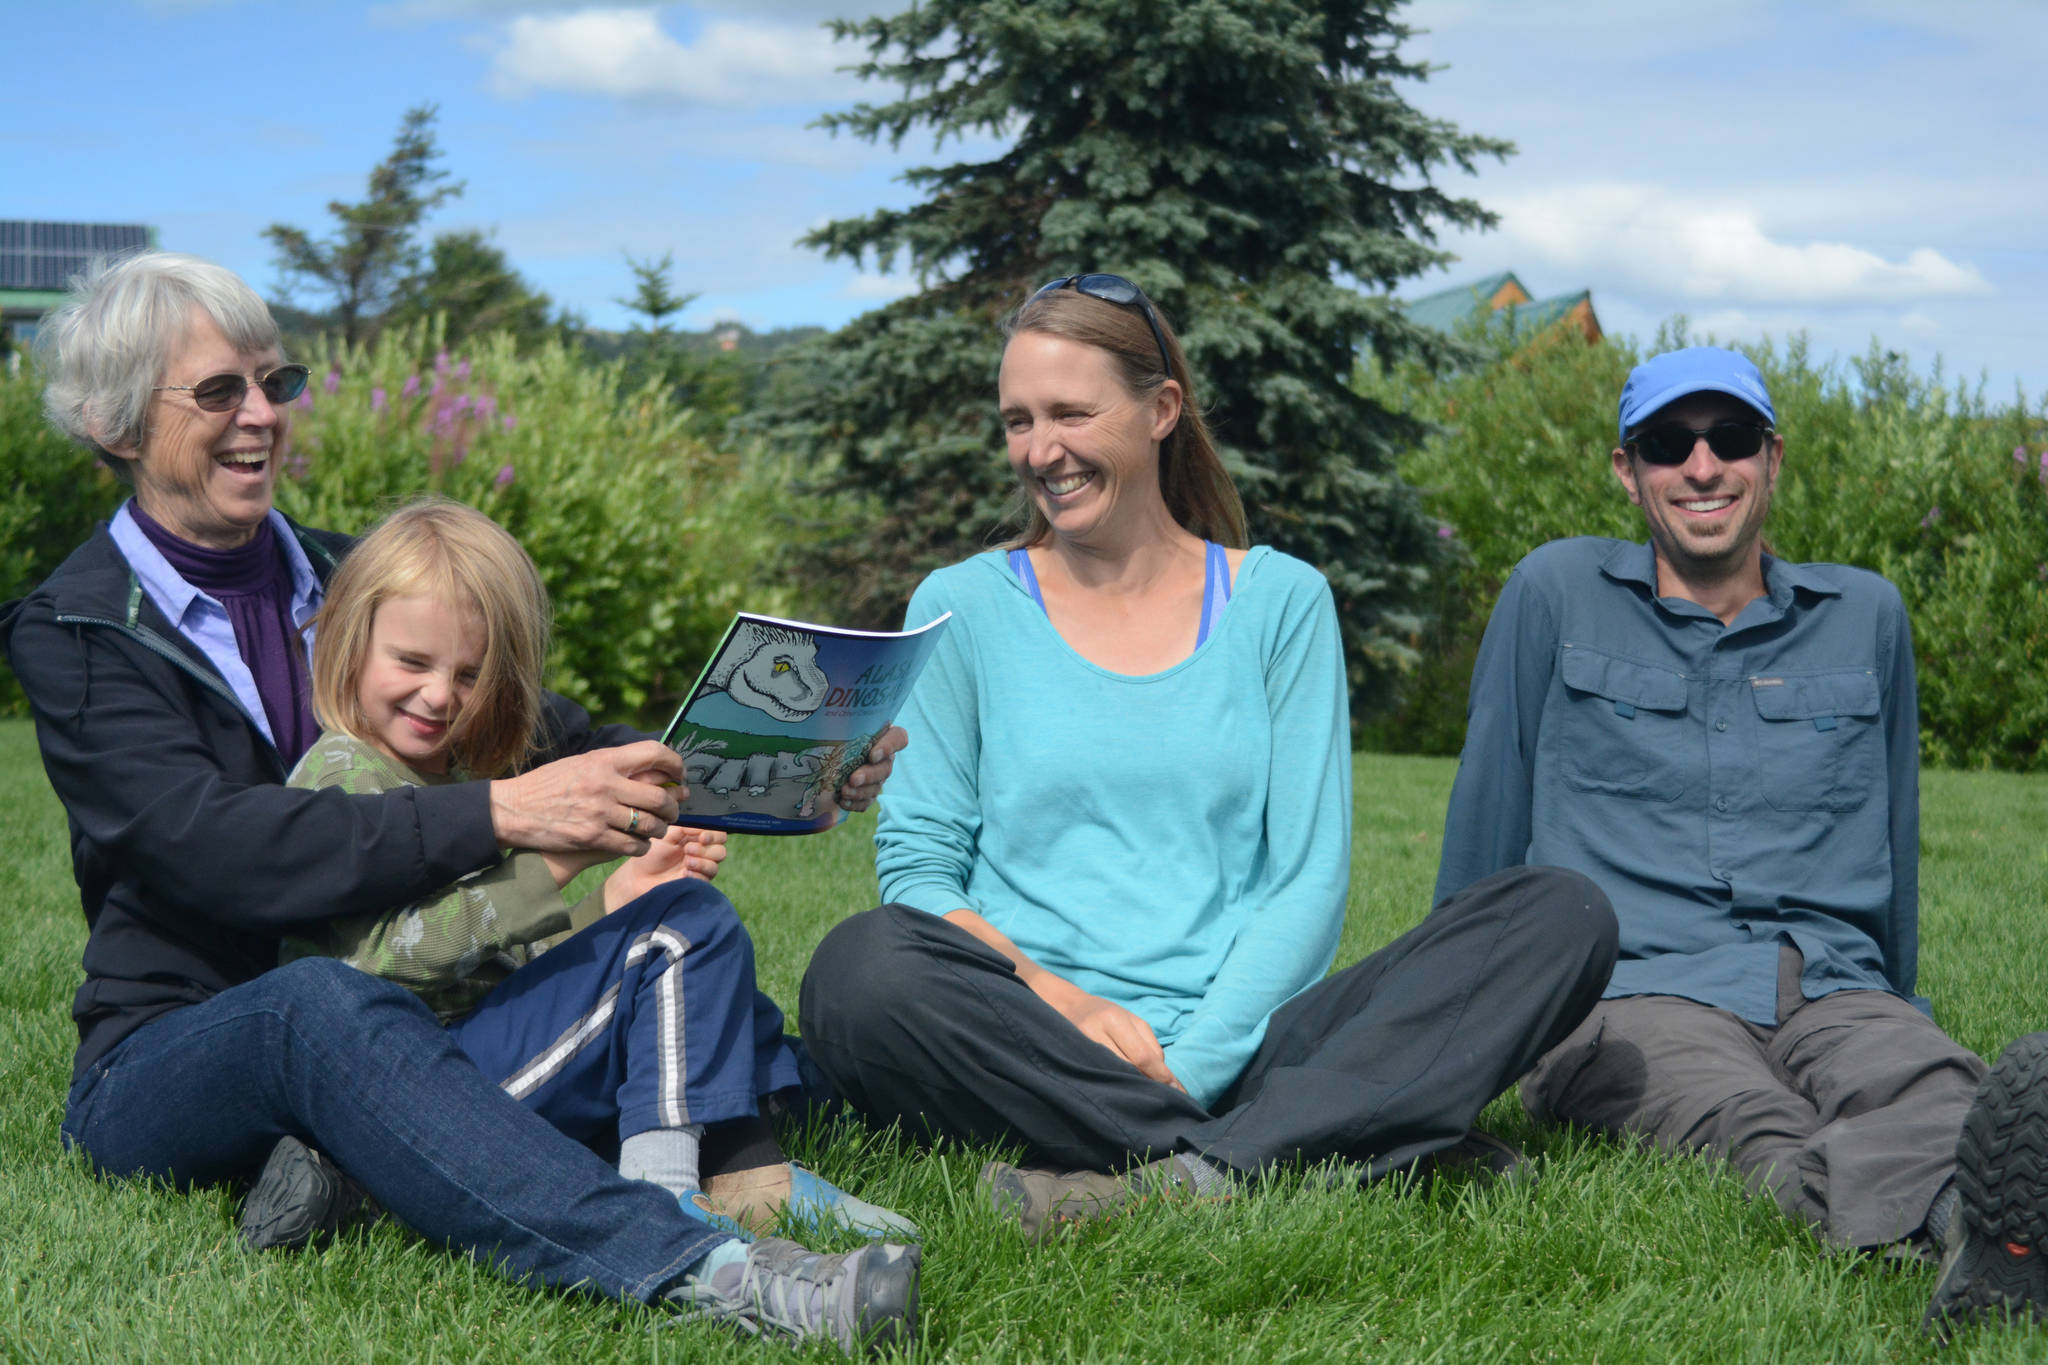 Janet Klein, left, holds her grandson, Silas Reising, 4, while she visits with her daughter, Deborah Klein, center, and son-in-law George Reising, right, at Bishop’s Beach, Homer, Alaska, on Aug. 9, 2018. Not shown is Kai Reising, 6. Sylas and Kai were the inspiration for the Klein’s “color and learn” book, “Alaska’s Dinosaurs and Other Cretaceous Creatures.”